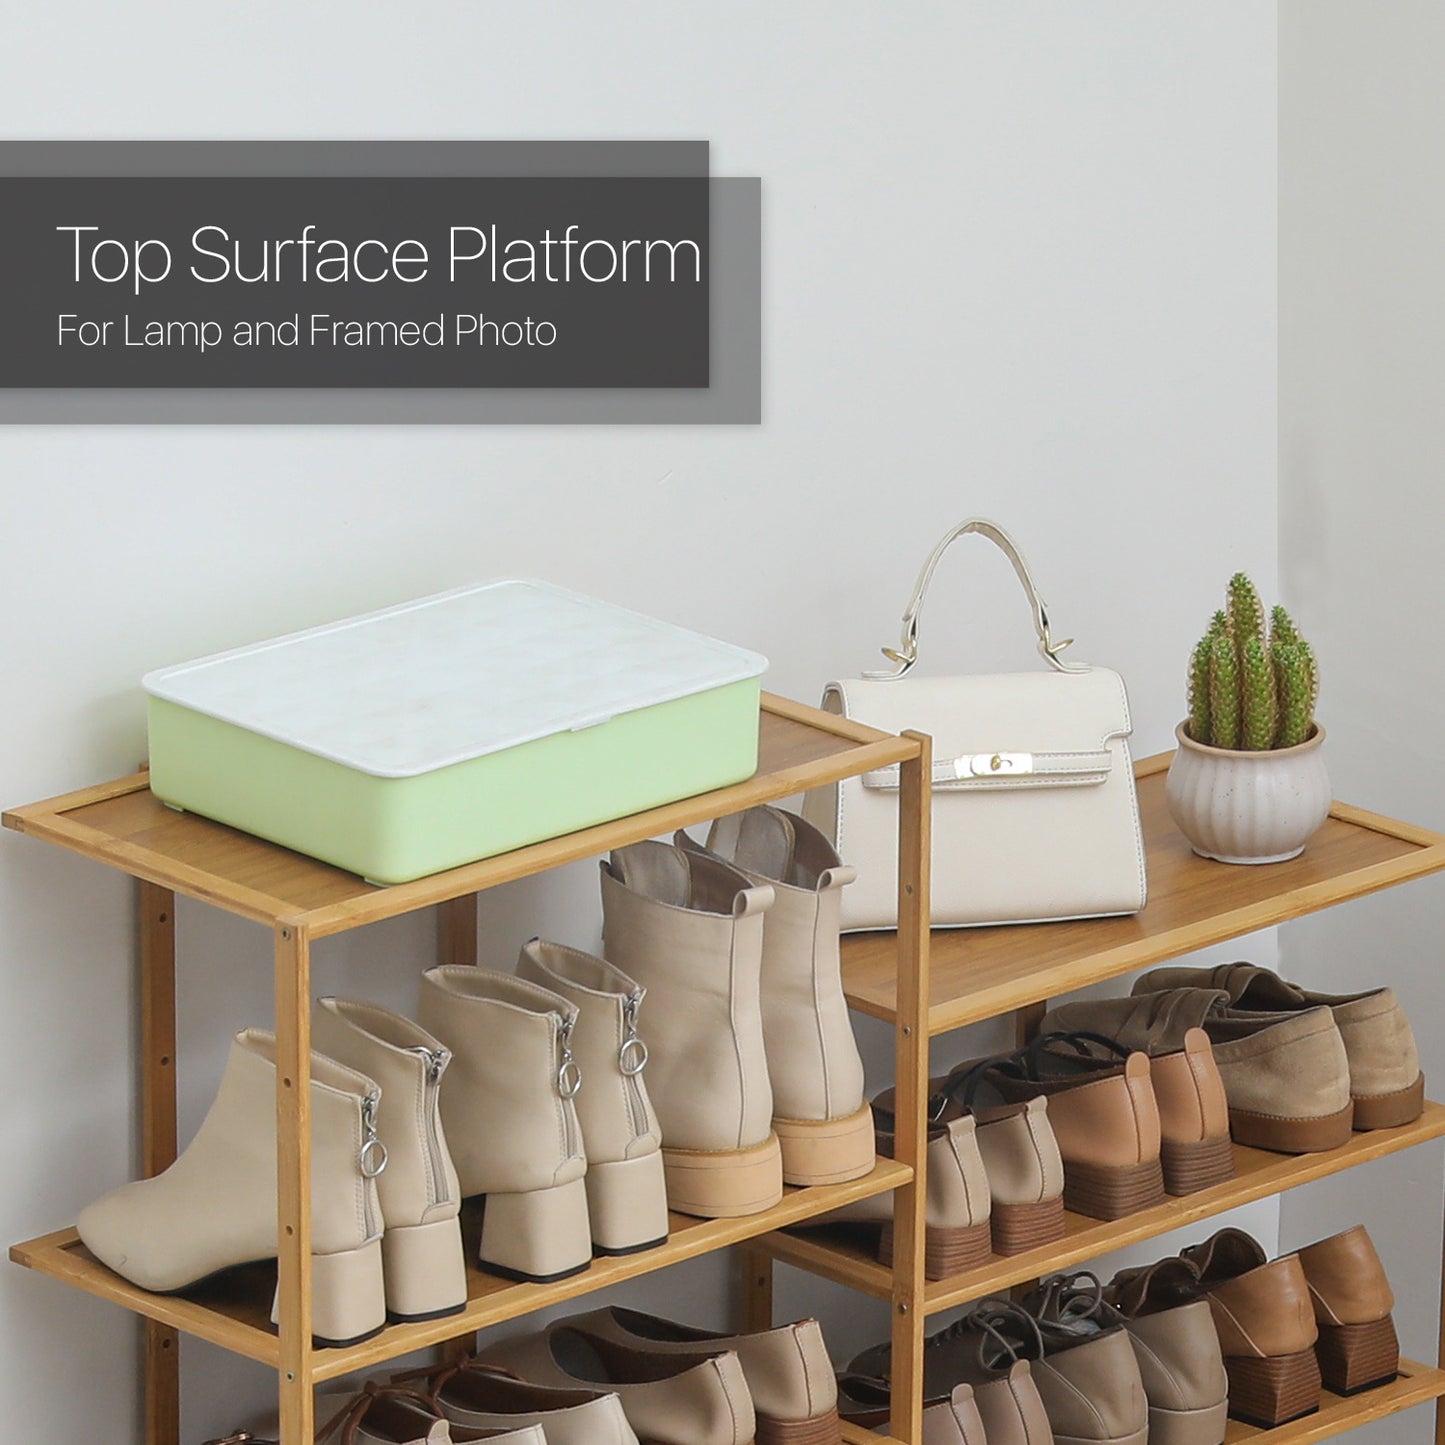 40" Twin Stand Shoe Rack - Natural